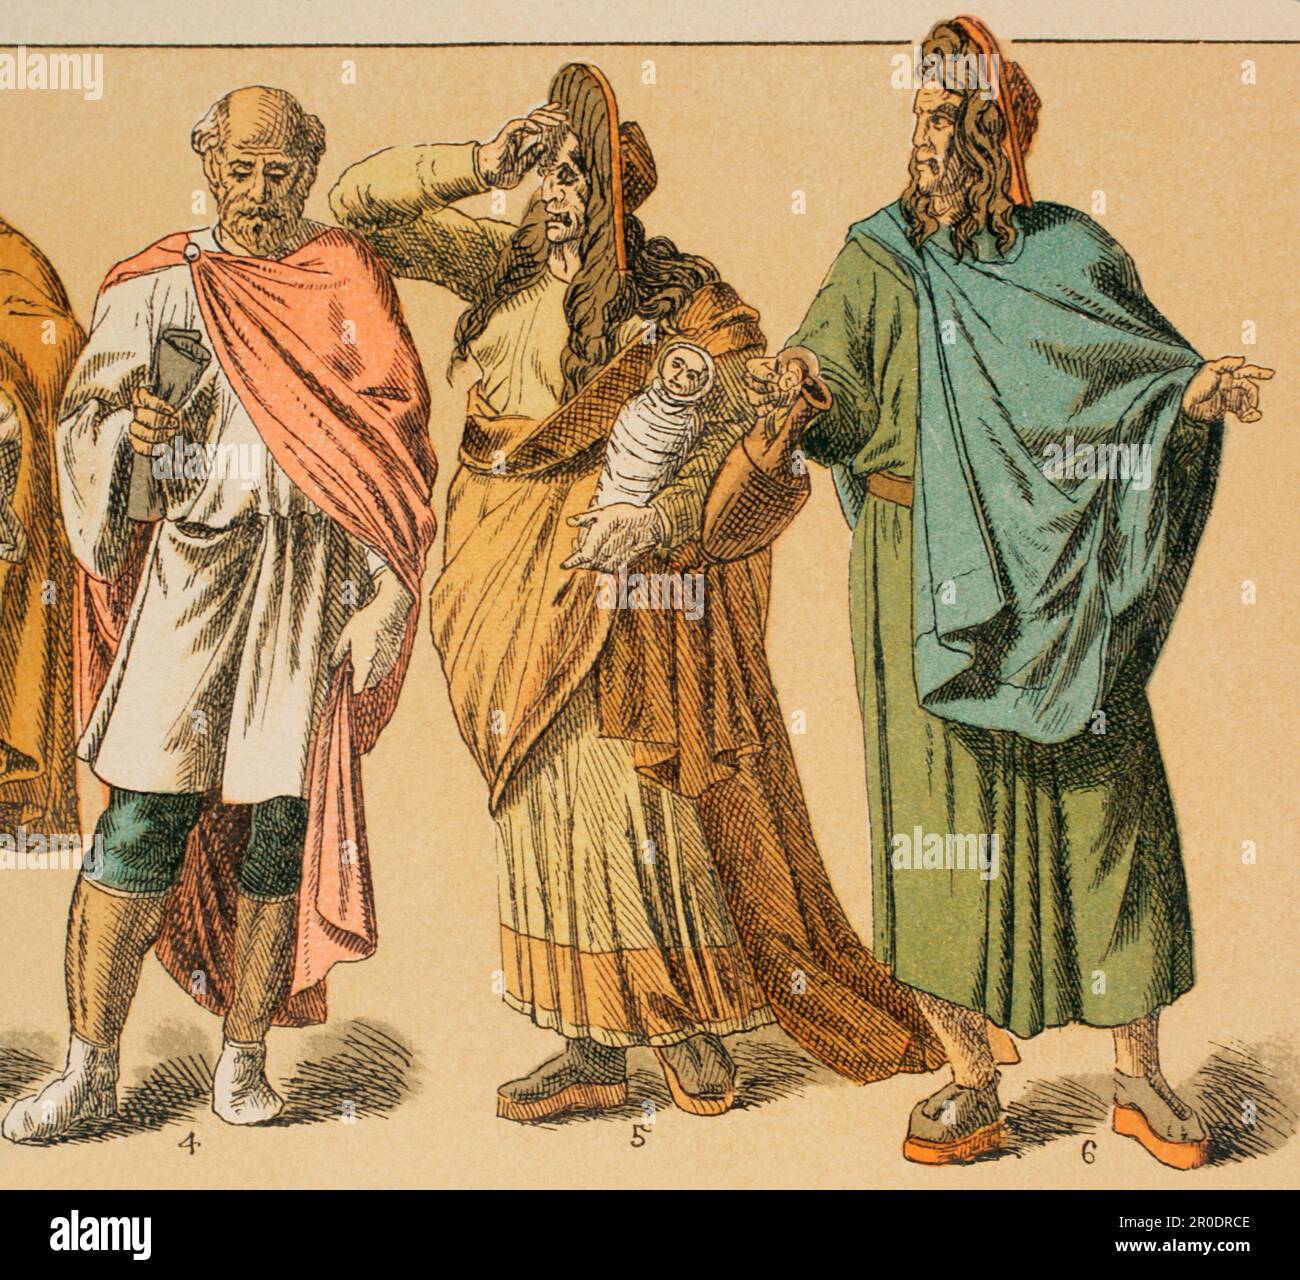 Roman times. From left to right: 4- tribune costume, 5 and 6- actors. Chromolithography. 'Historia Universal', by César Cantú. Volume II, 1881. Stock Photo